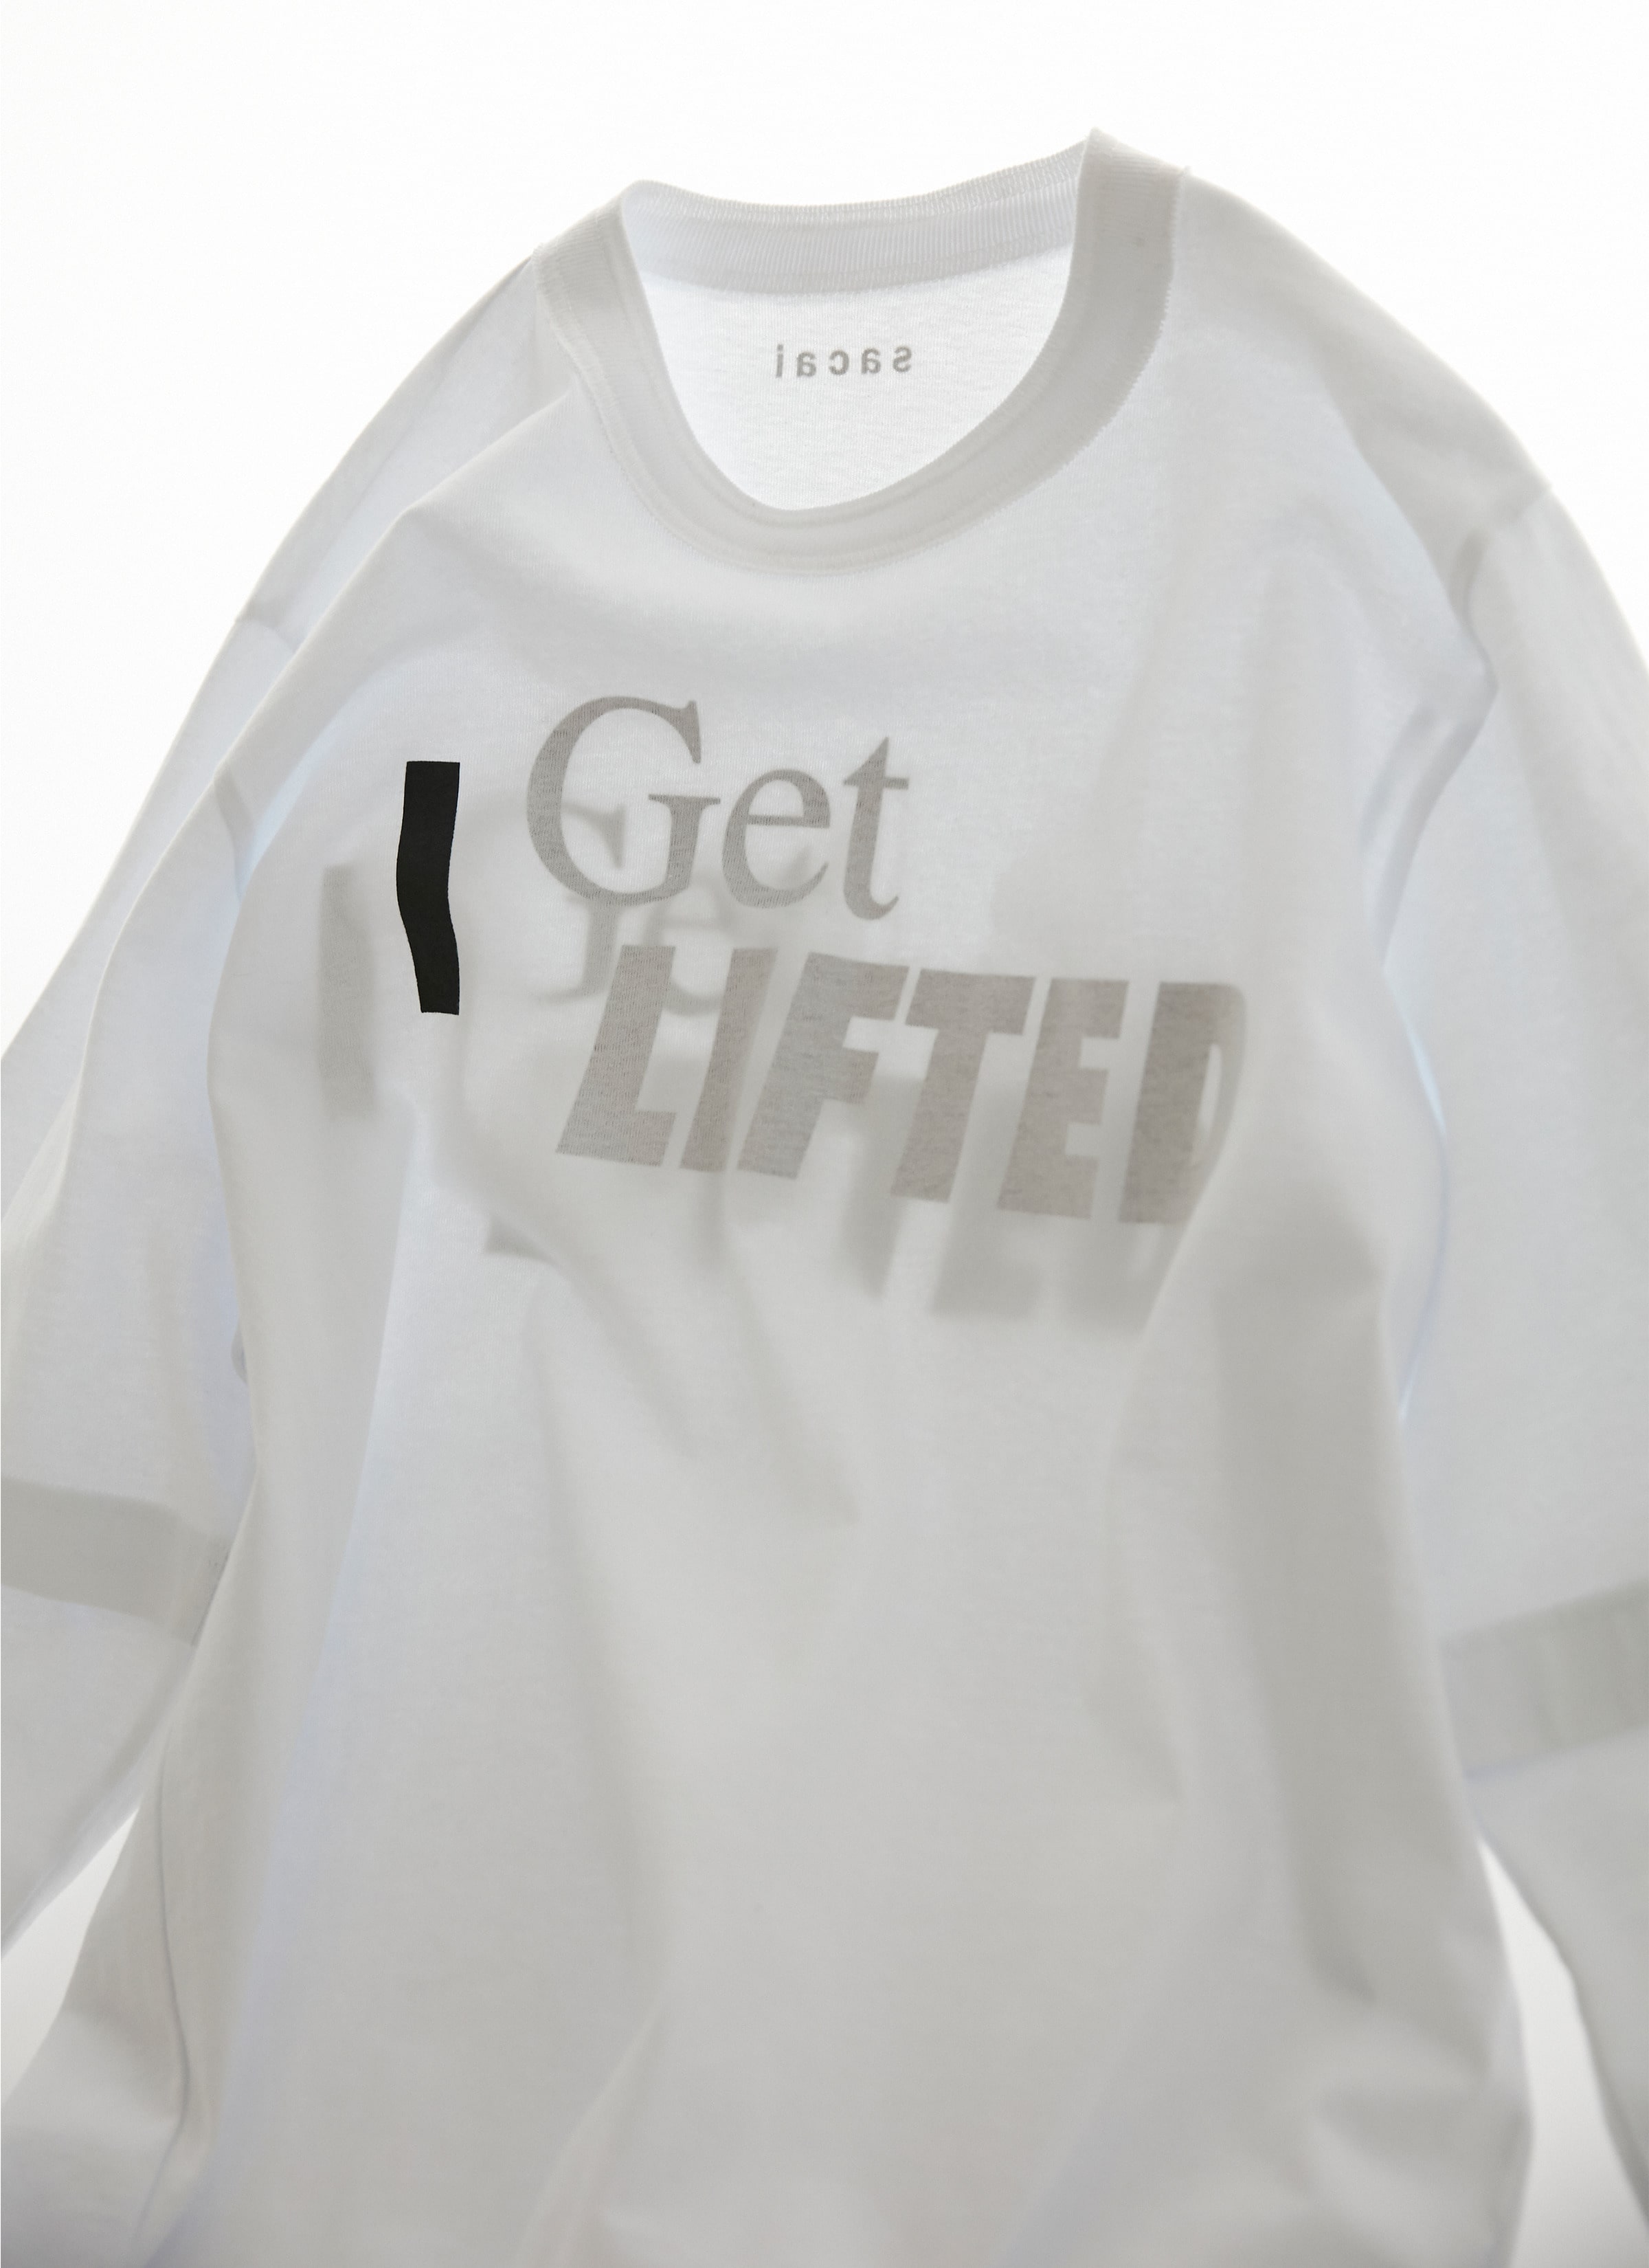 I Get LIFTED L/S T-Shirt 詳細画像 WHITE 3